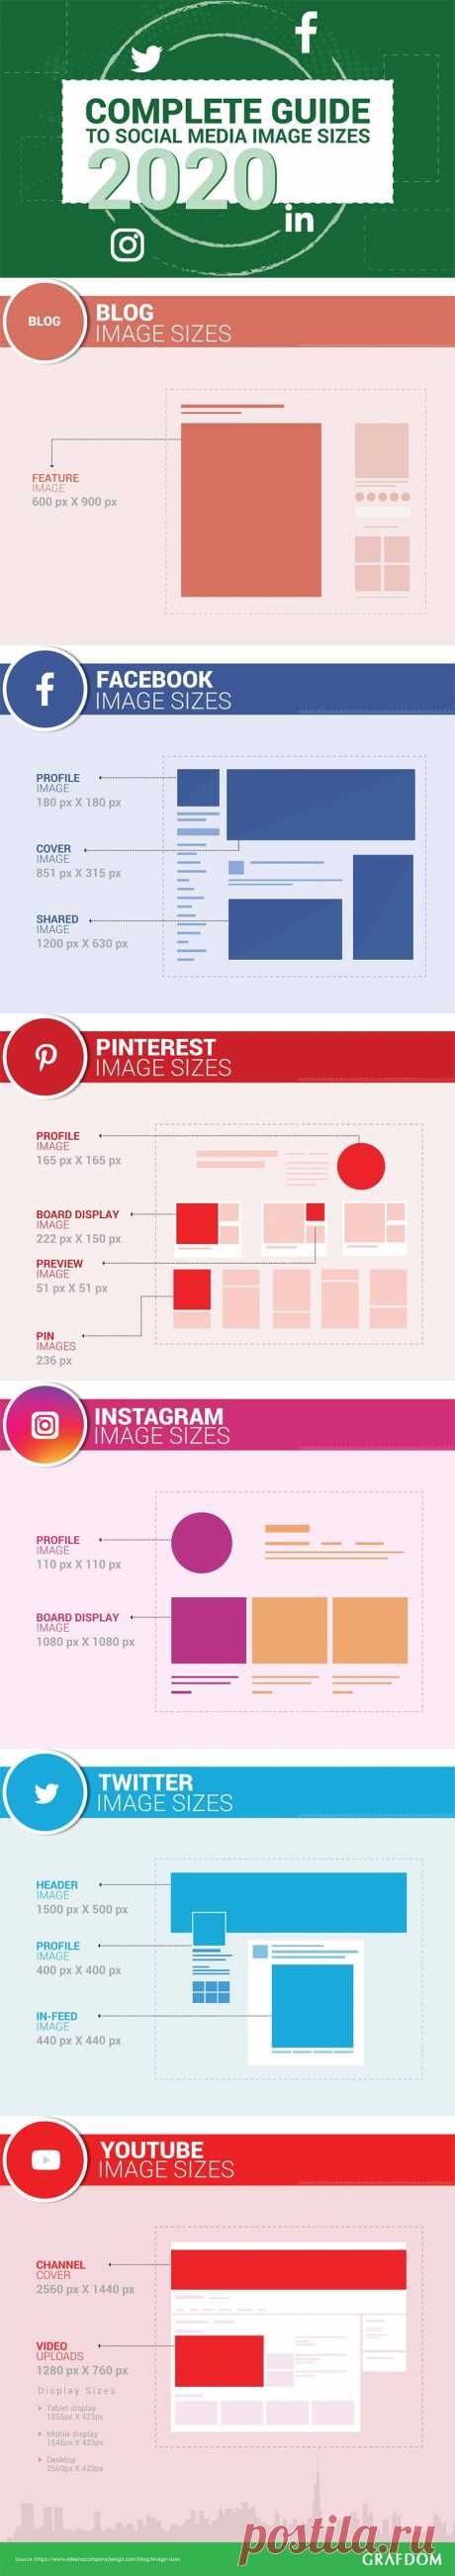 A Beginners Guide to Social Media Image Sizes for 2020
They cover the following platforms:
Blog
Facebook
Pinterest
Instagram
Twitter
YouTube